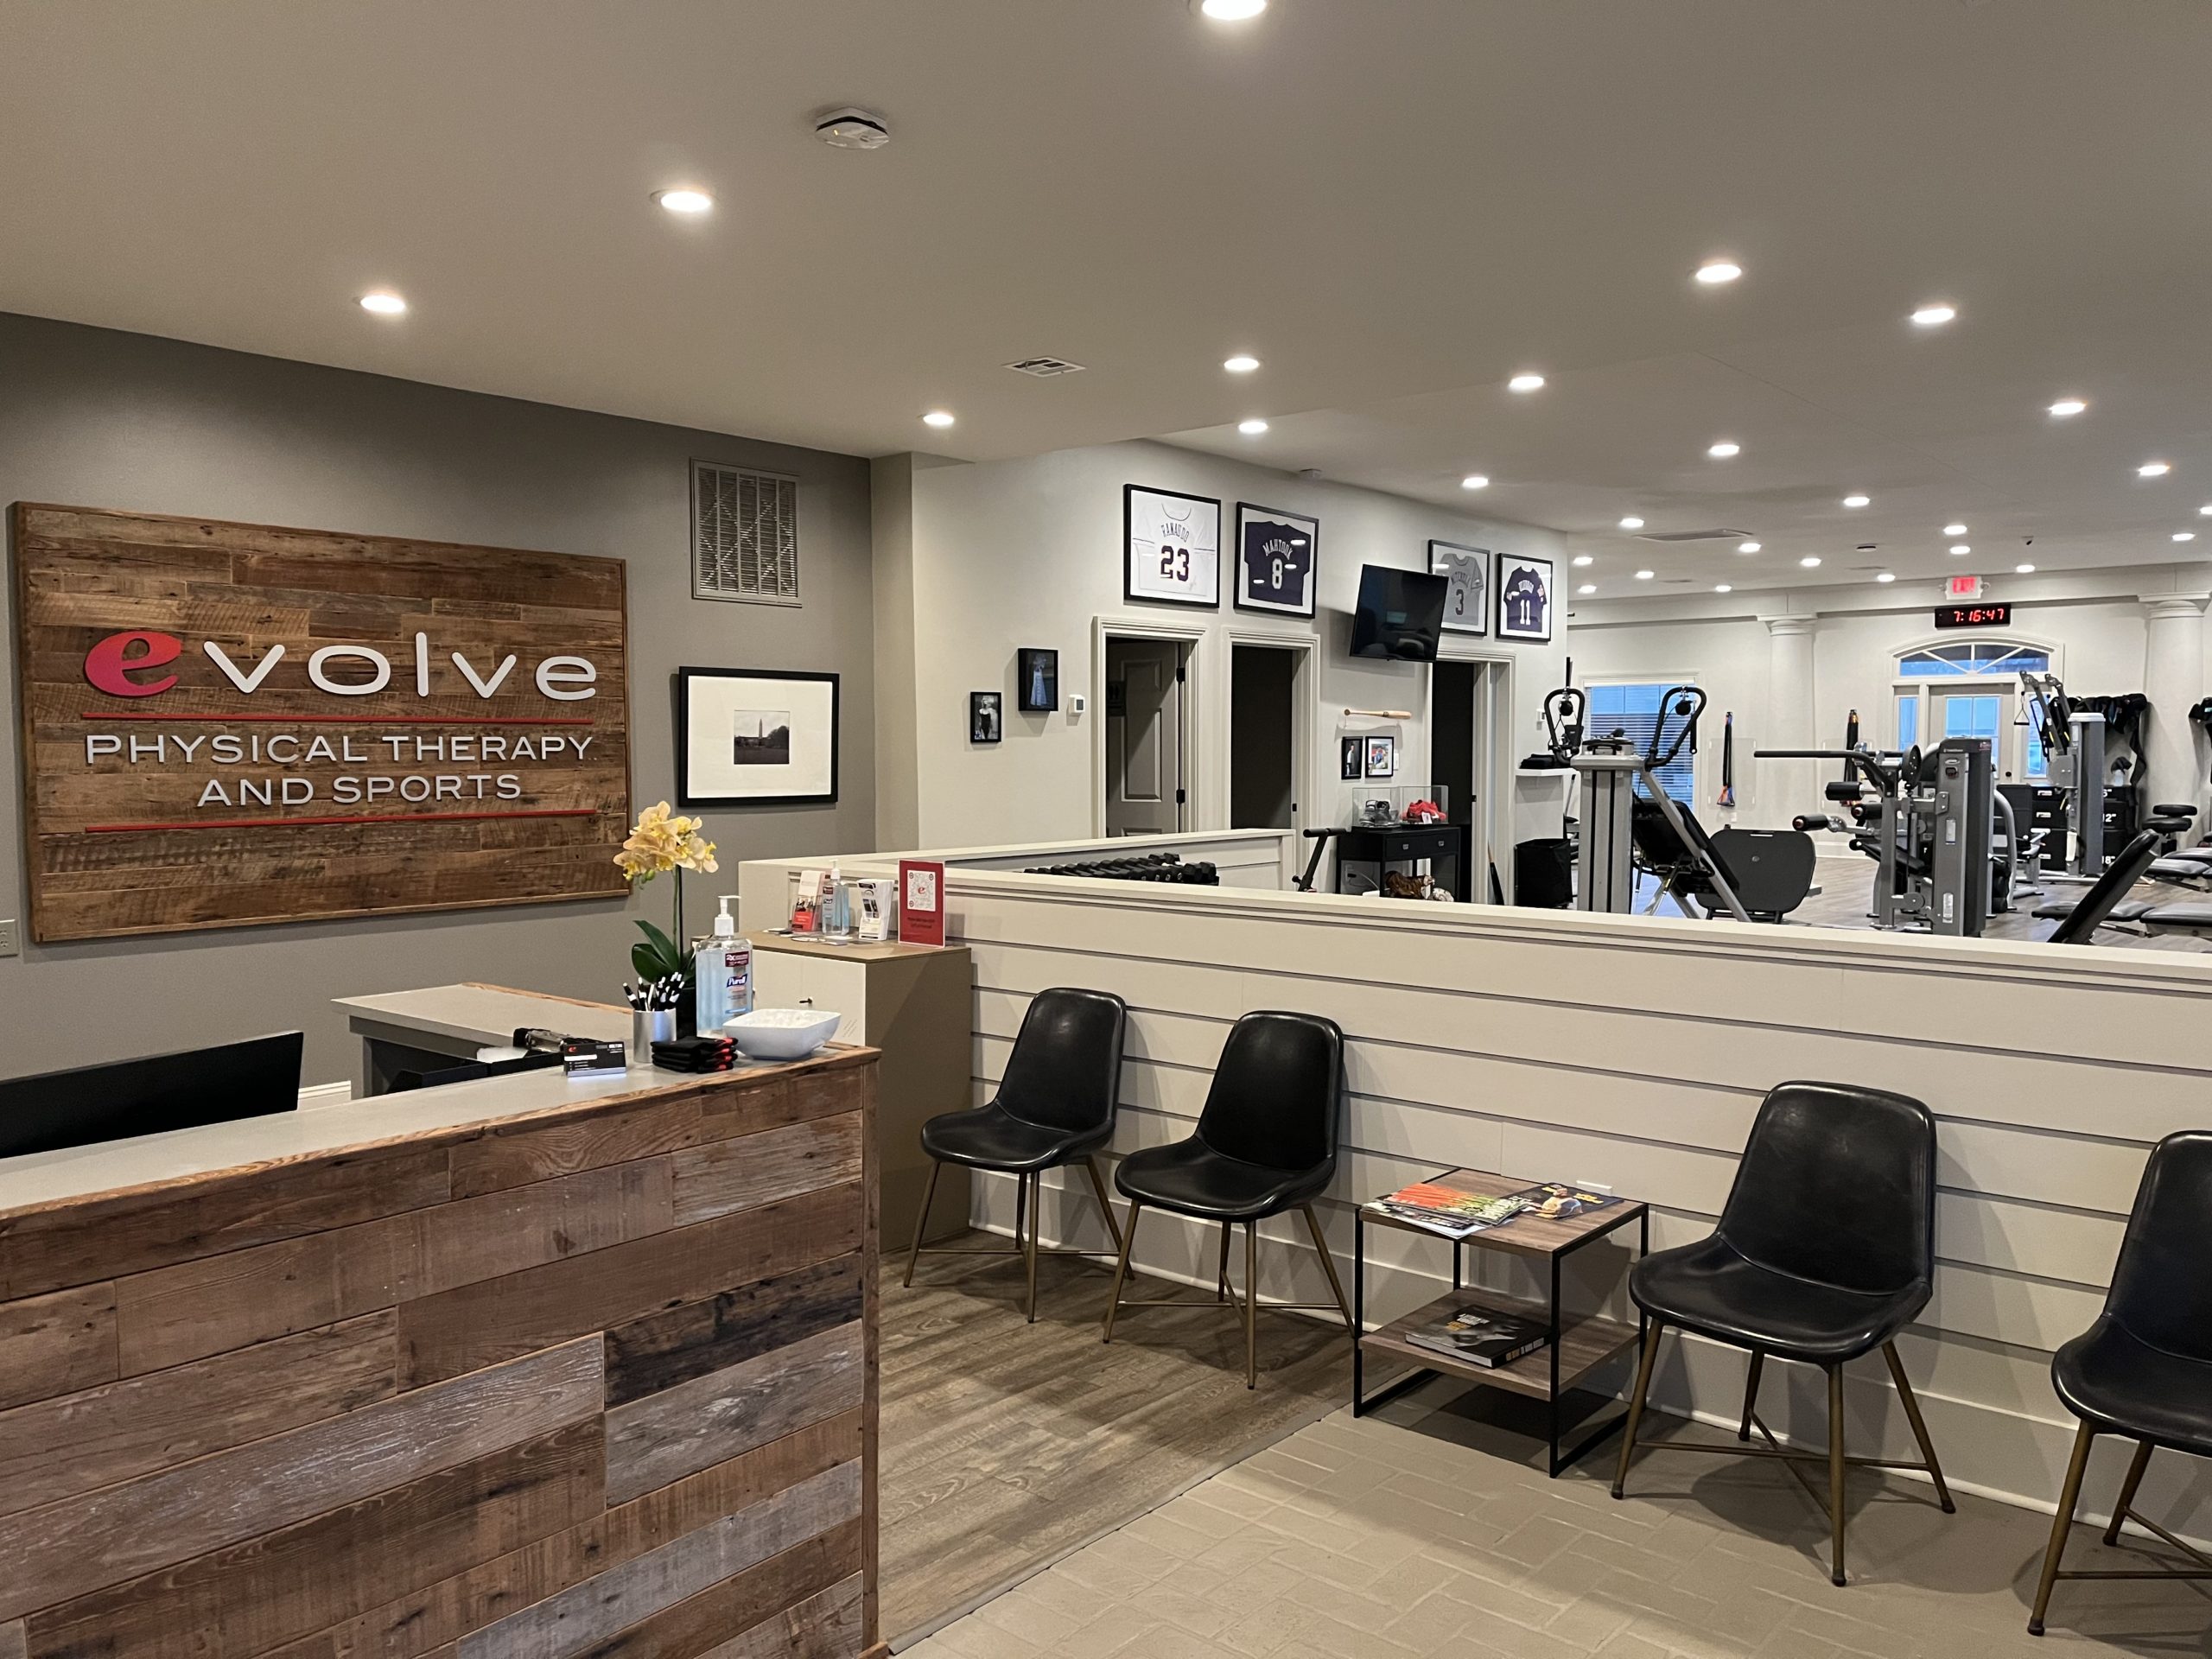 Evolve Physical Therapy Lobby